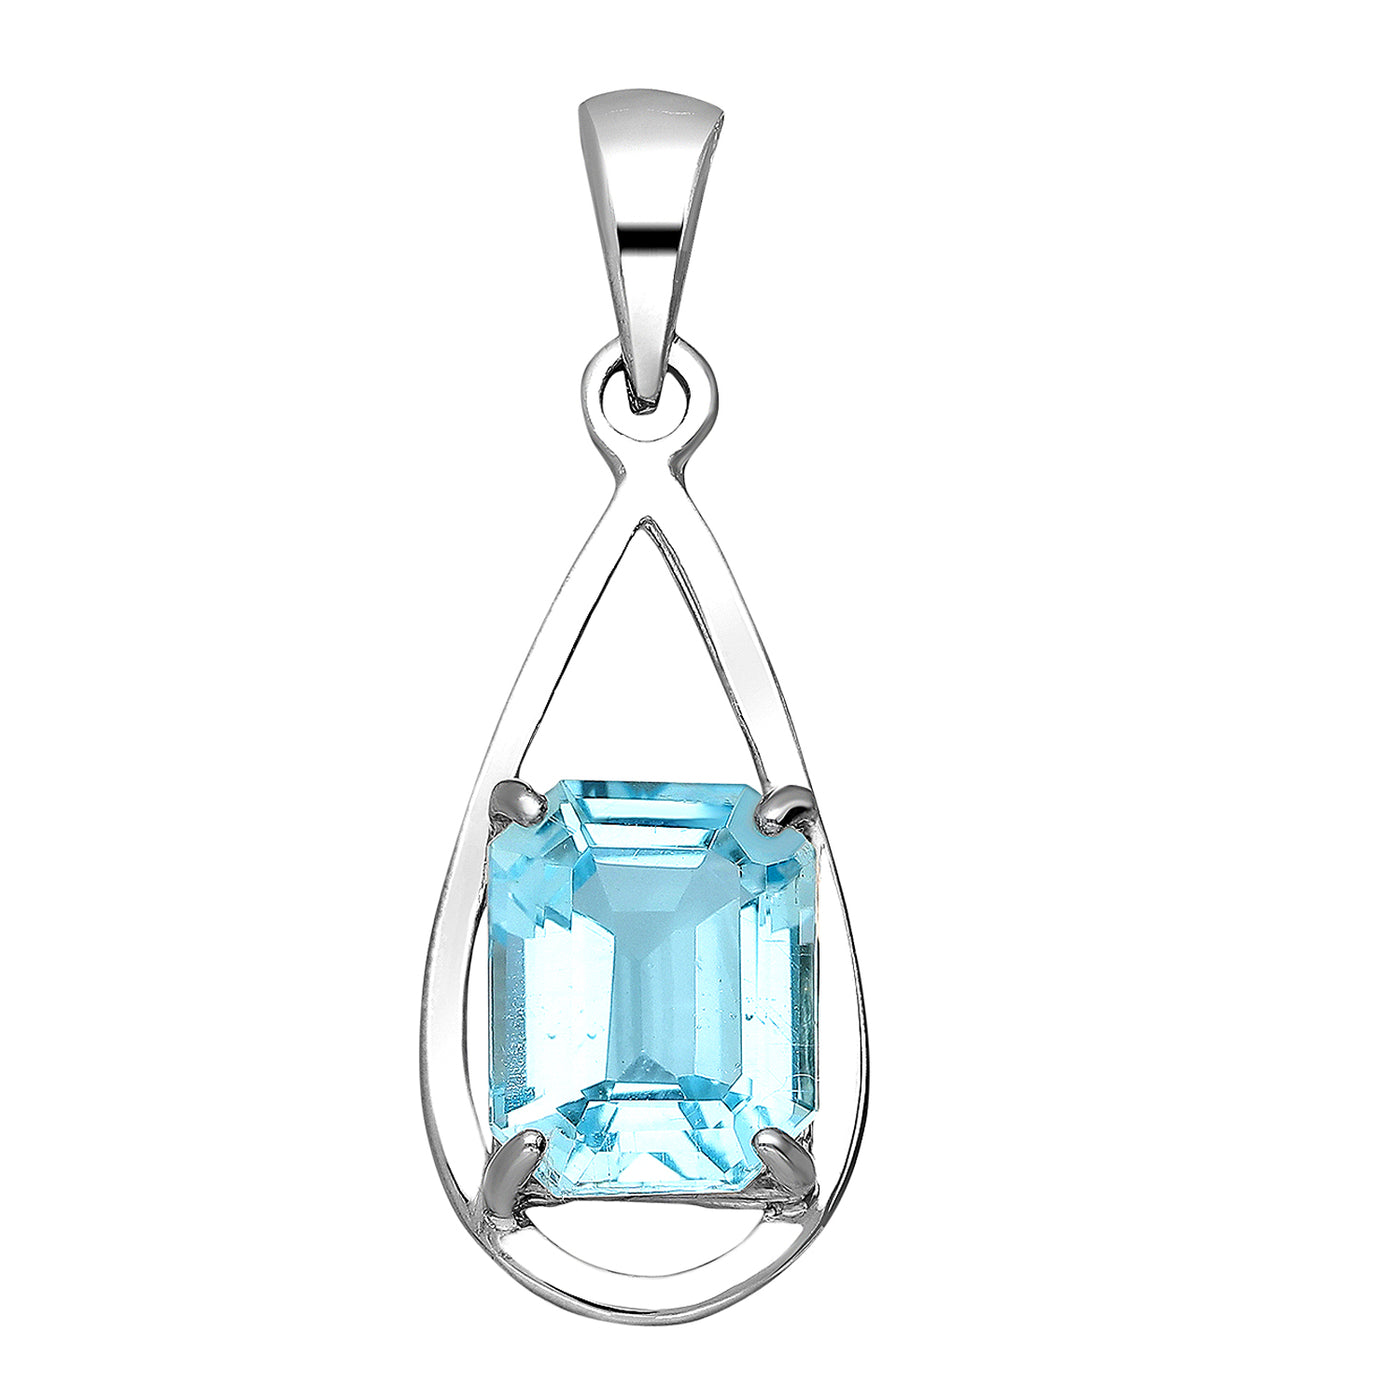 Topaz and Silver Pendant Necklace